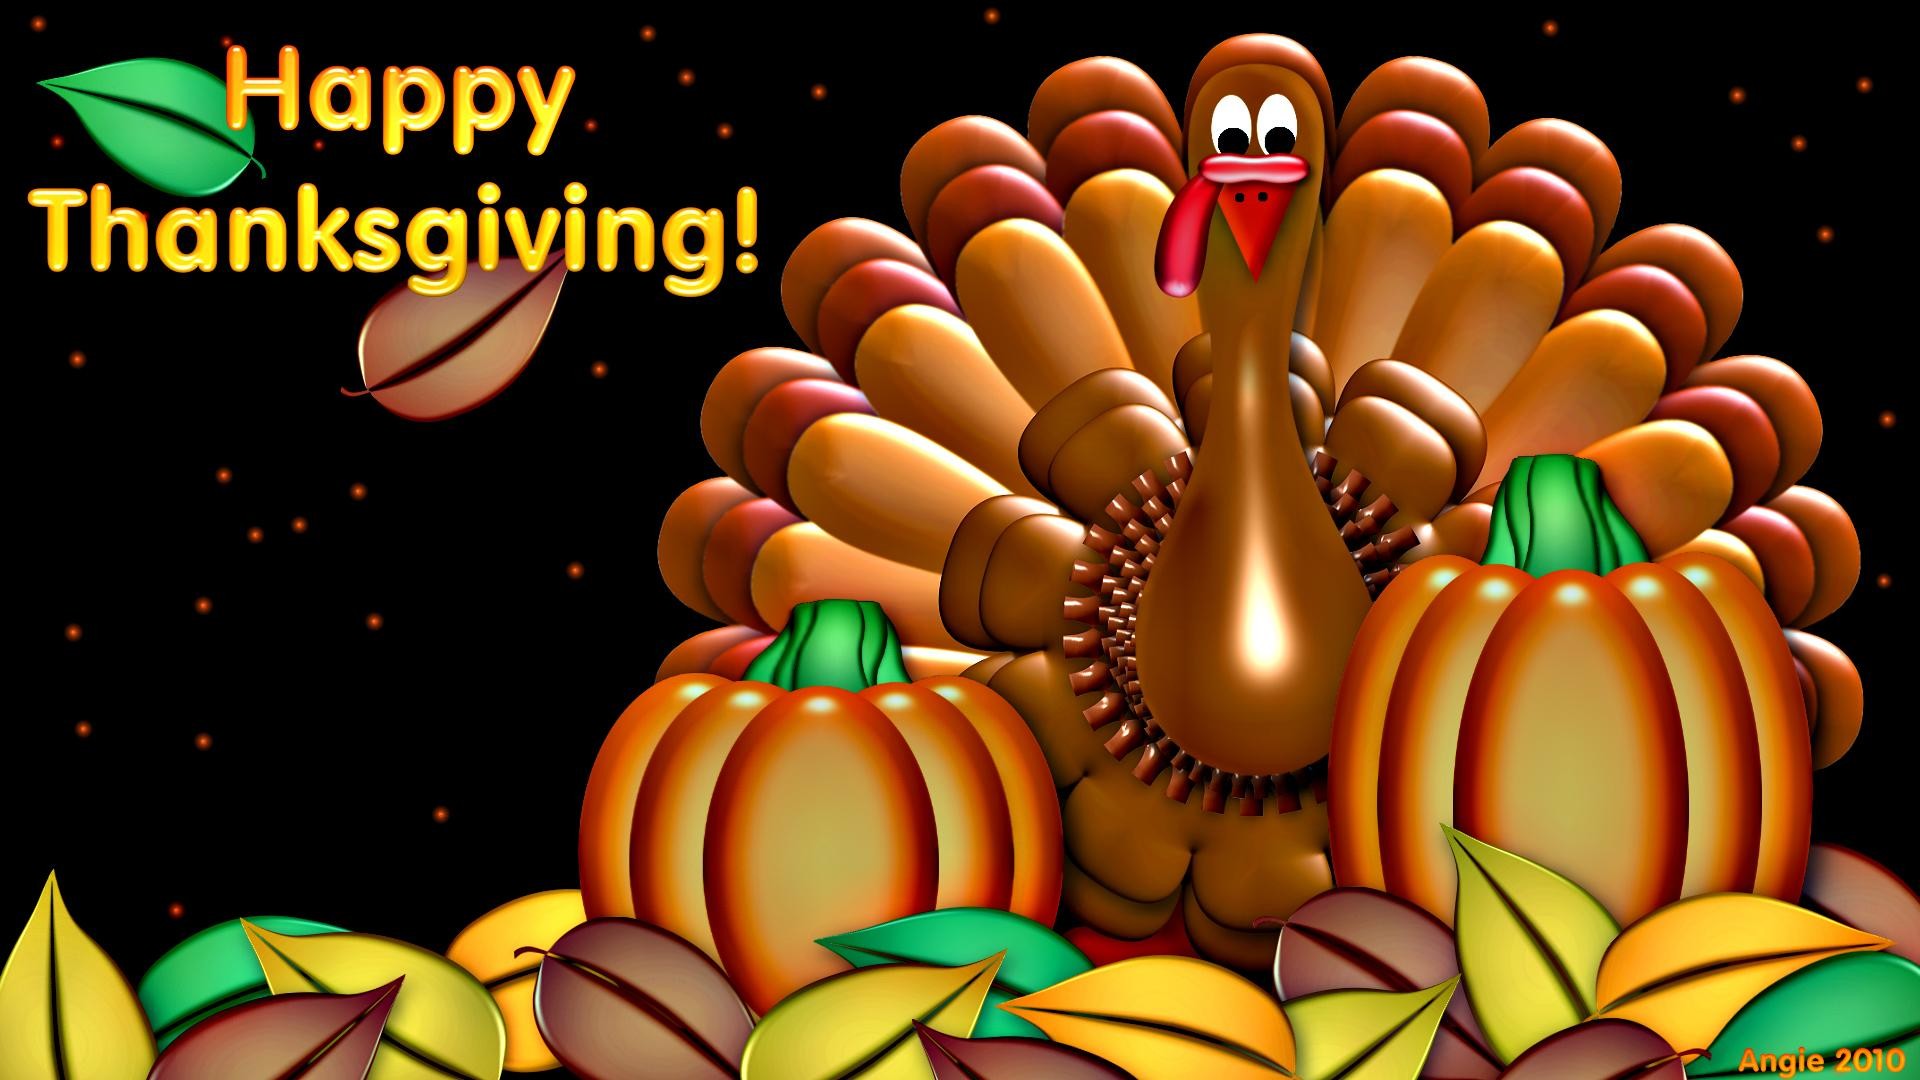 1920x1080 Thanksgiving HD Wallpapers : Get Free top quality Thanksgiving HD .